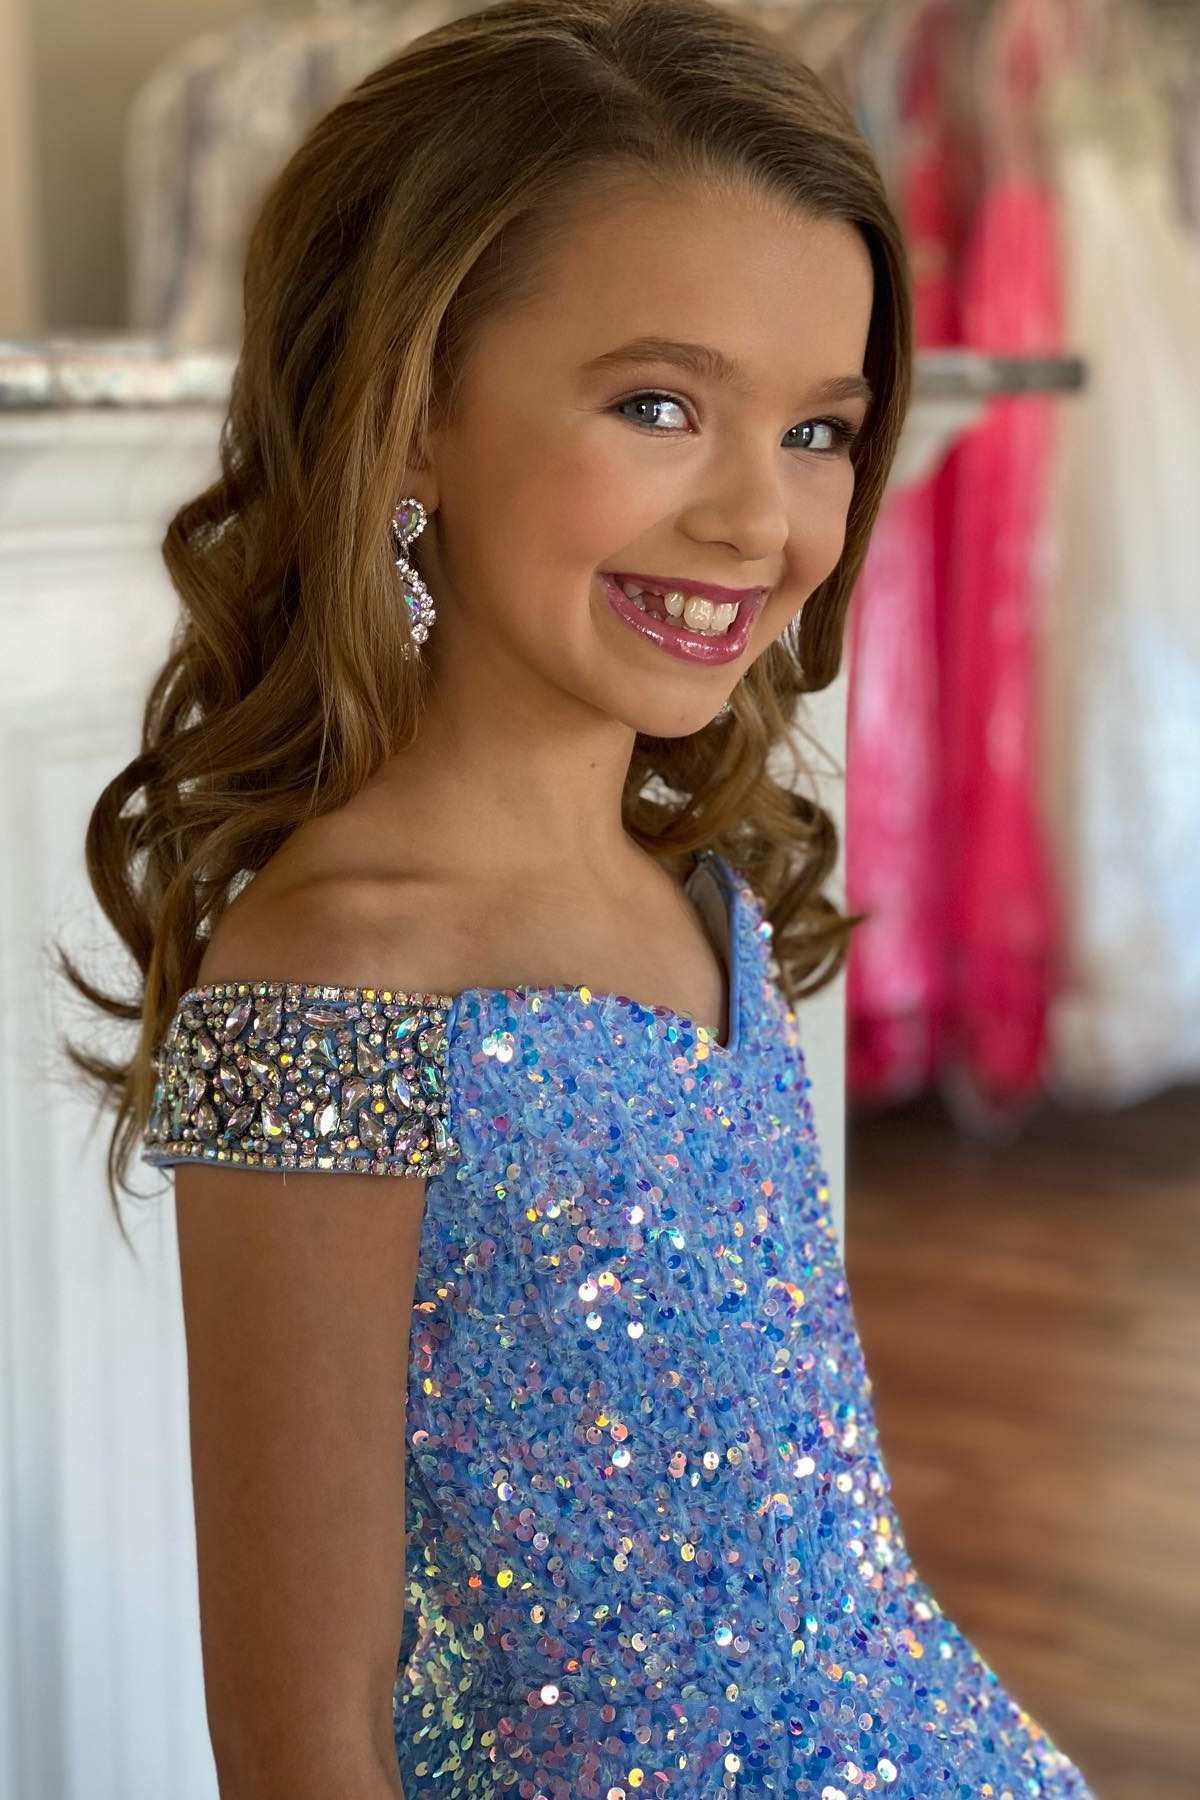 girls pageant dresses